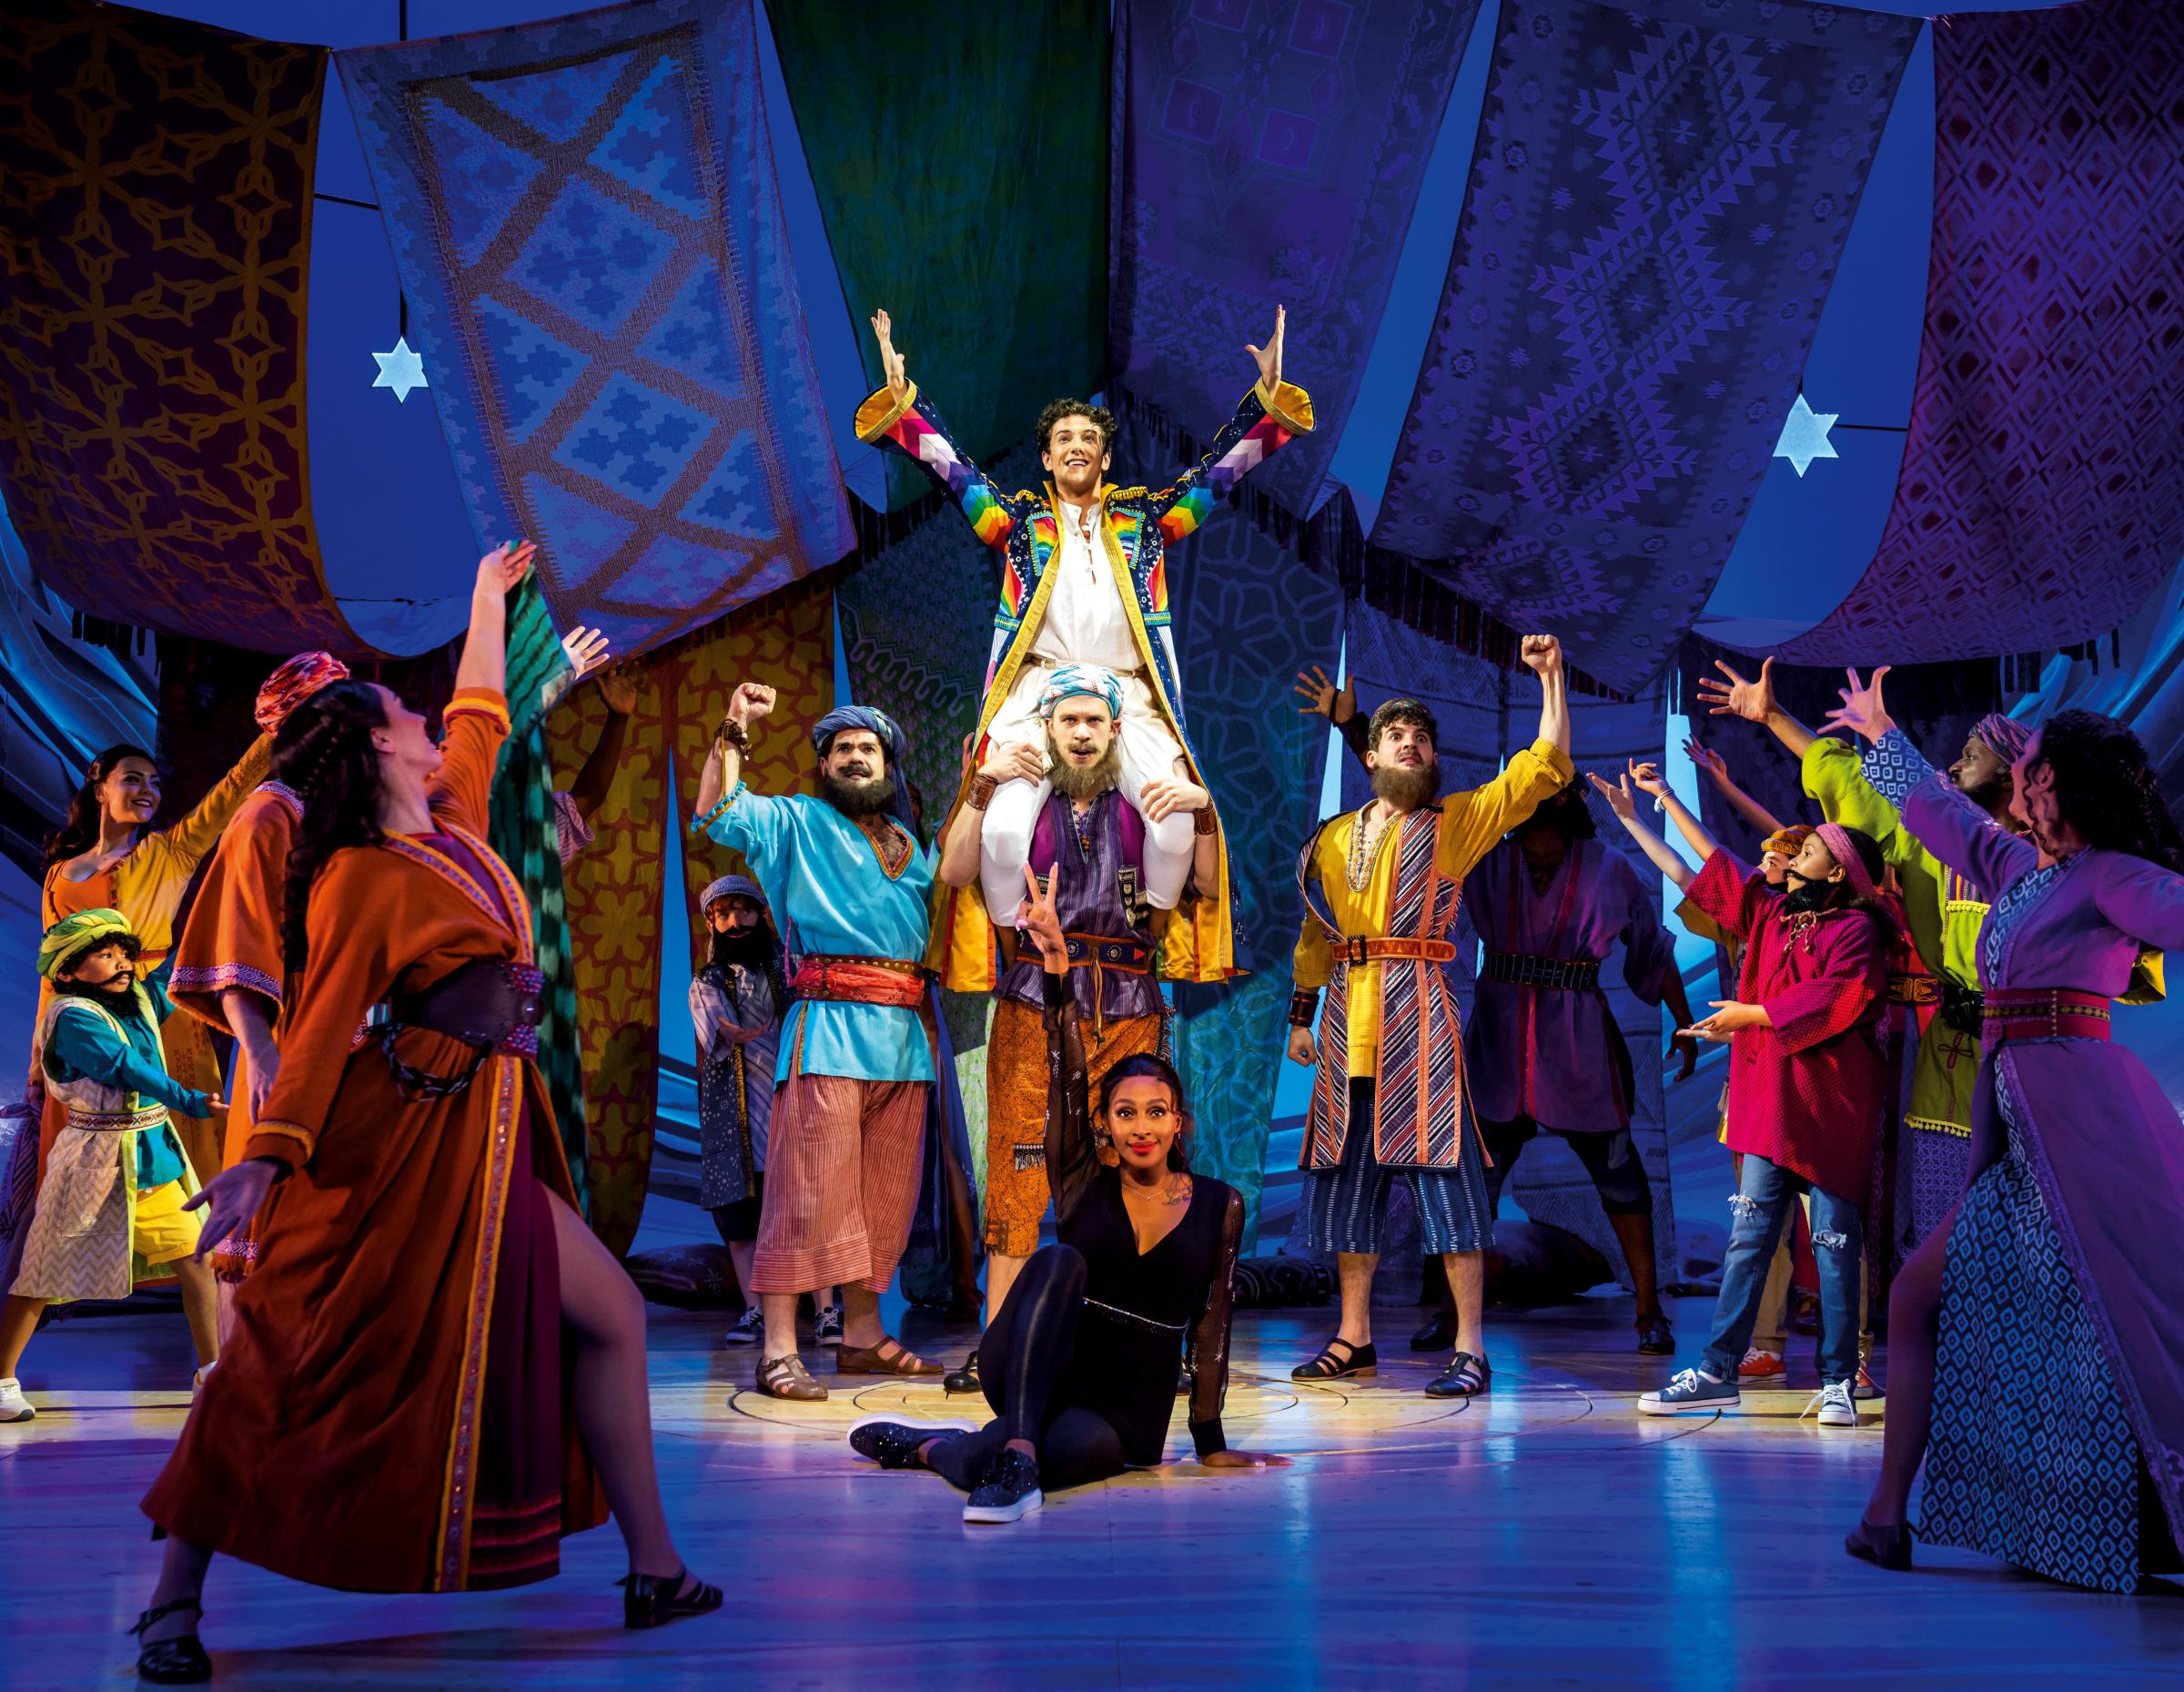 lexandra Burke as the narrator and Jac Yarrow as Joseph in Joseph and the Amazing Technicolor Dreamcoat (Picture: Tristram Kenton)